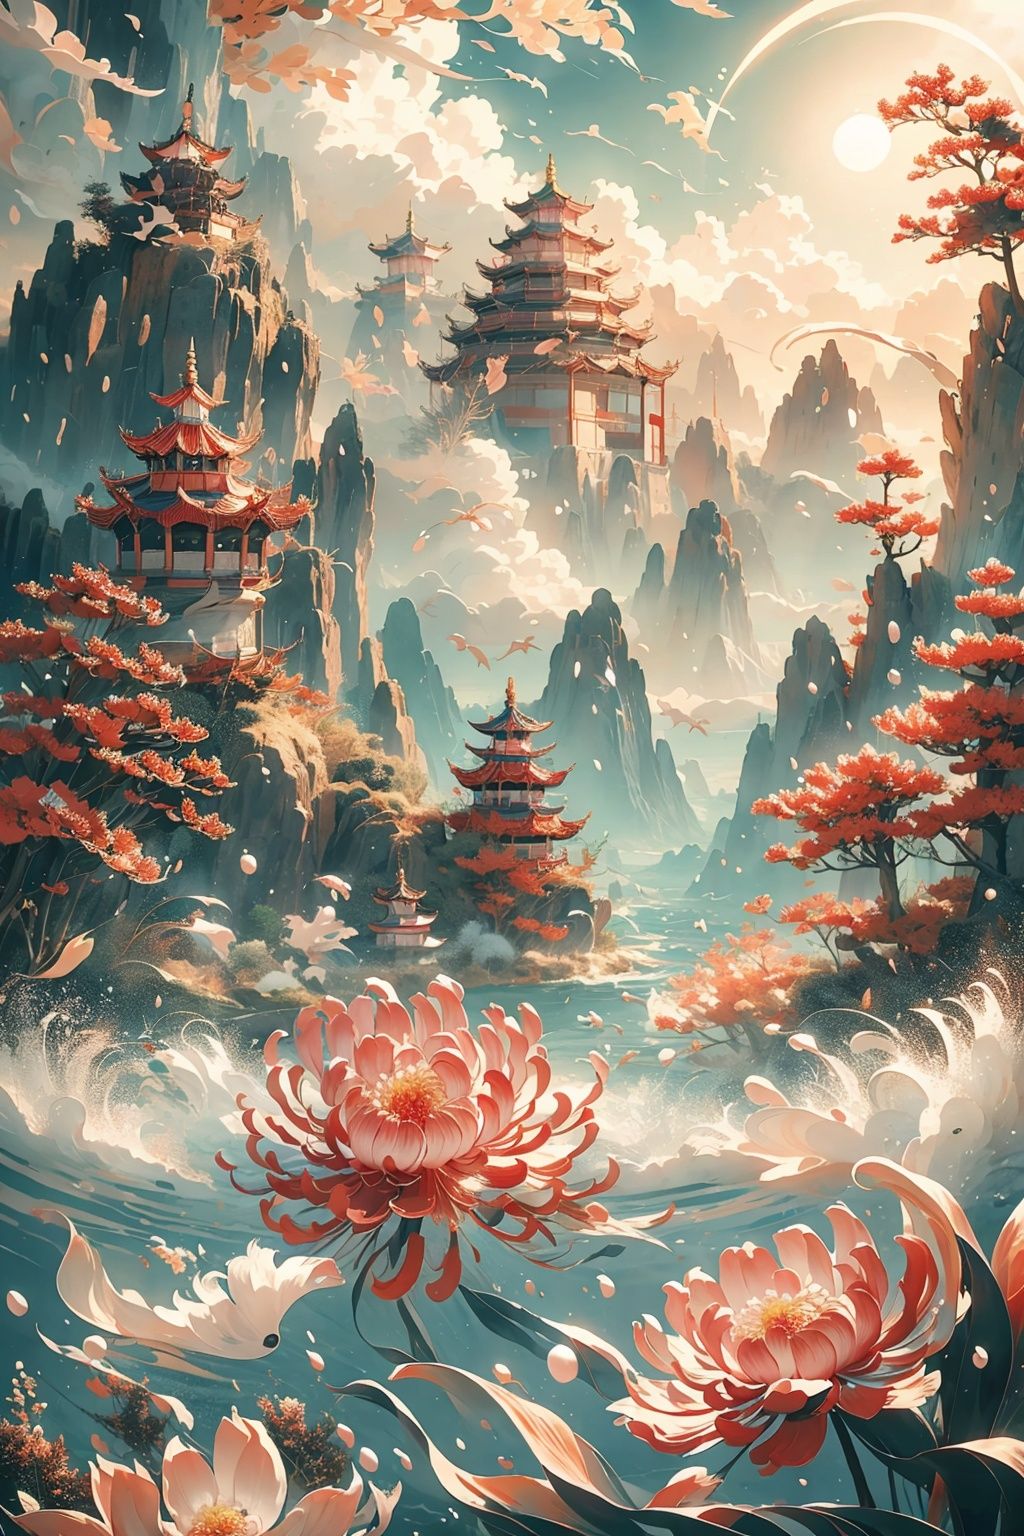 The realm of the sky, During the day, Red, romantic, masterpiece, HD,guochao,shuixia